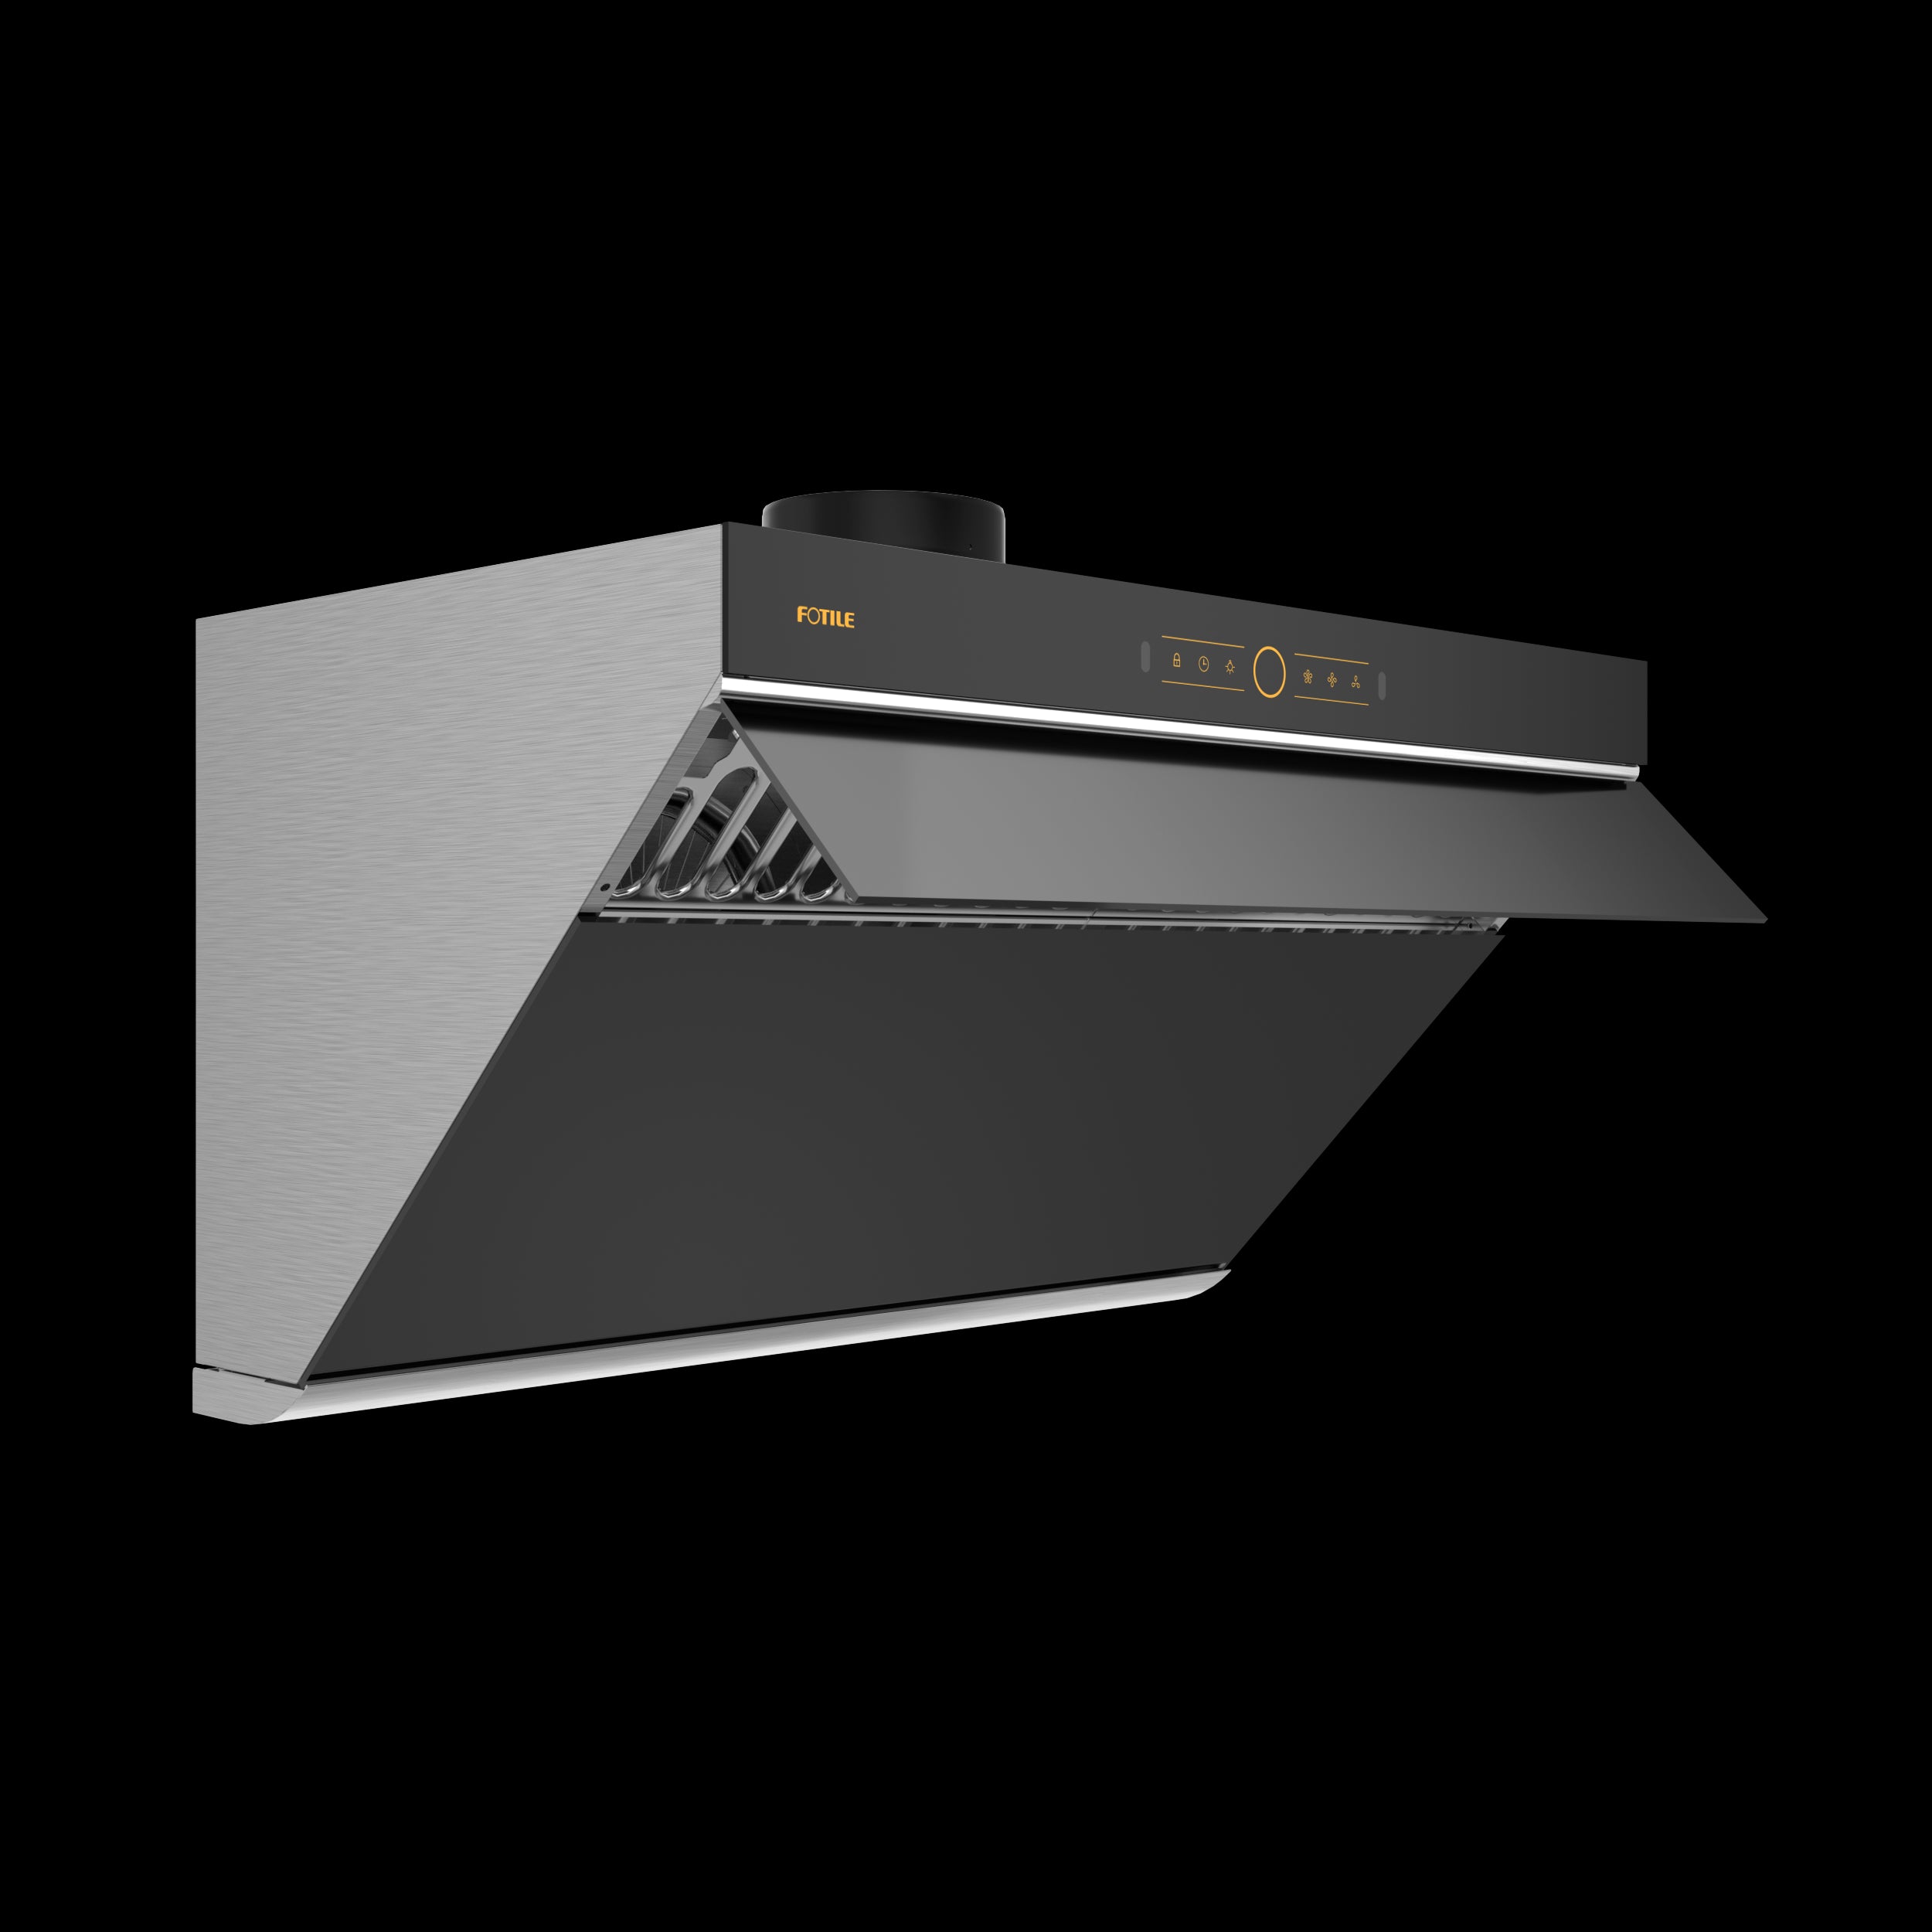 FOTILE V Series 30 1000 CFM Range Hood with Touchscreen in Onyx Black  Tempered Glass - Superco Appliances, Furniture & Home Design